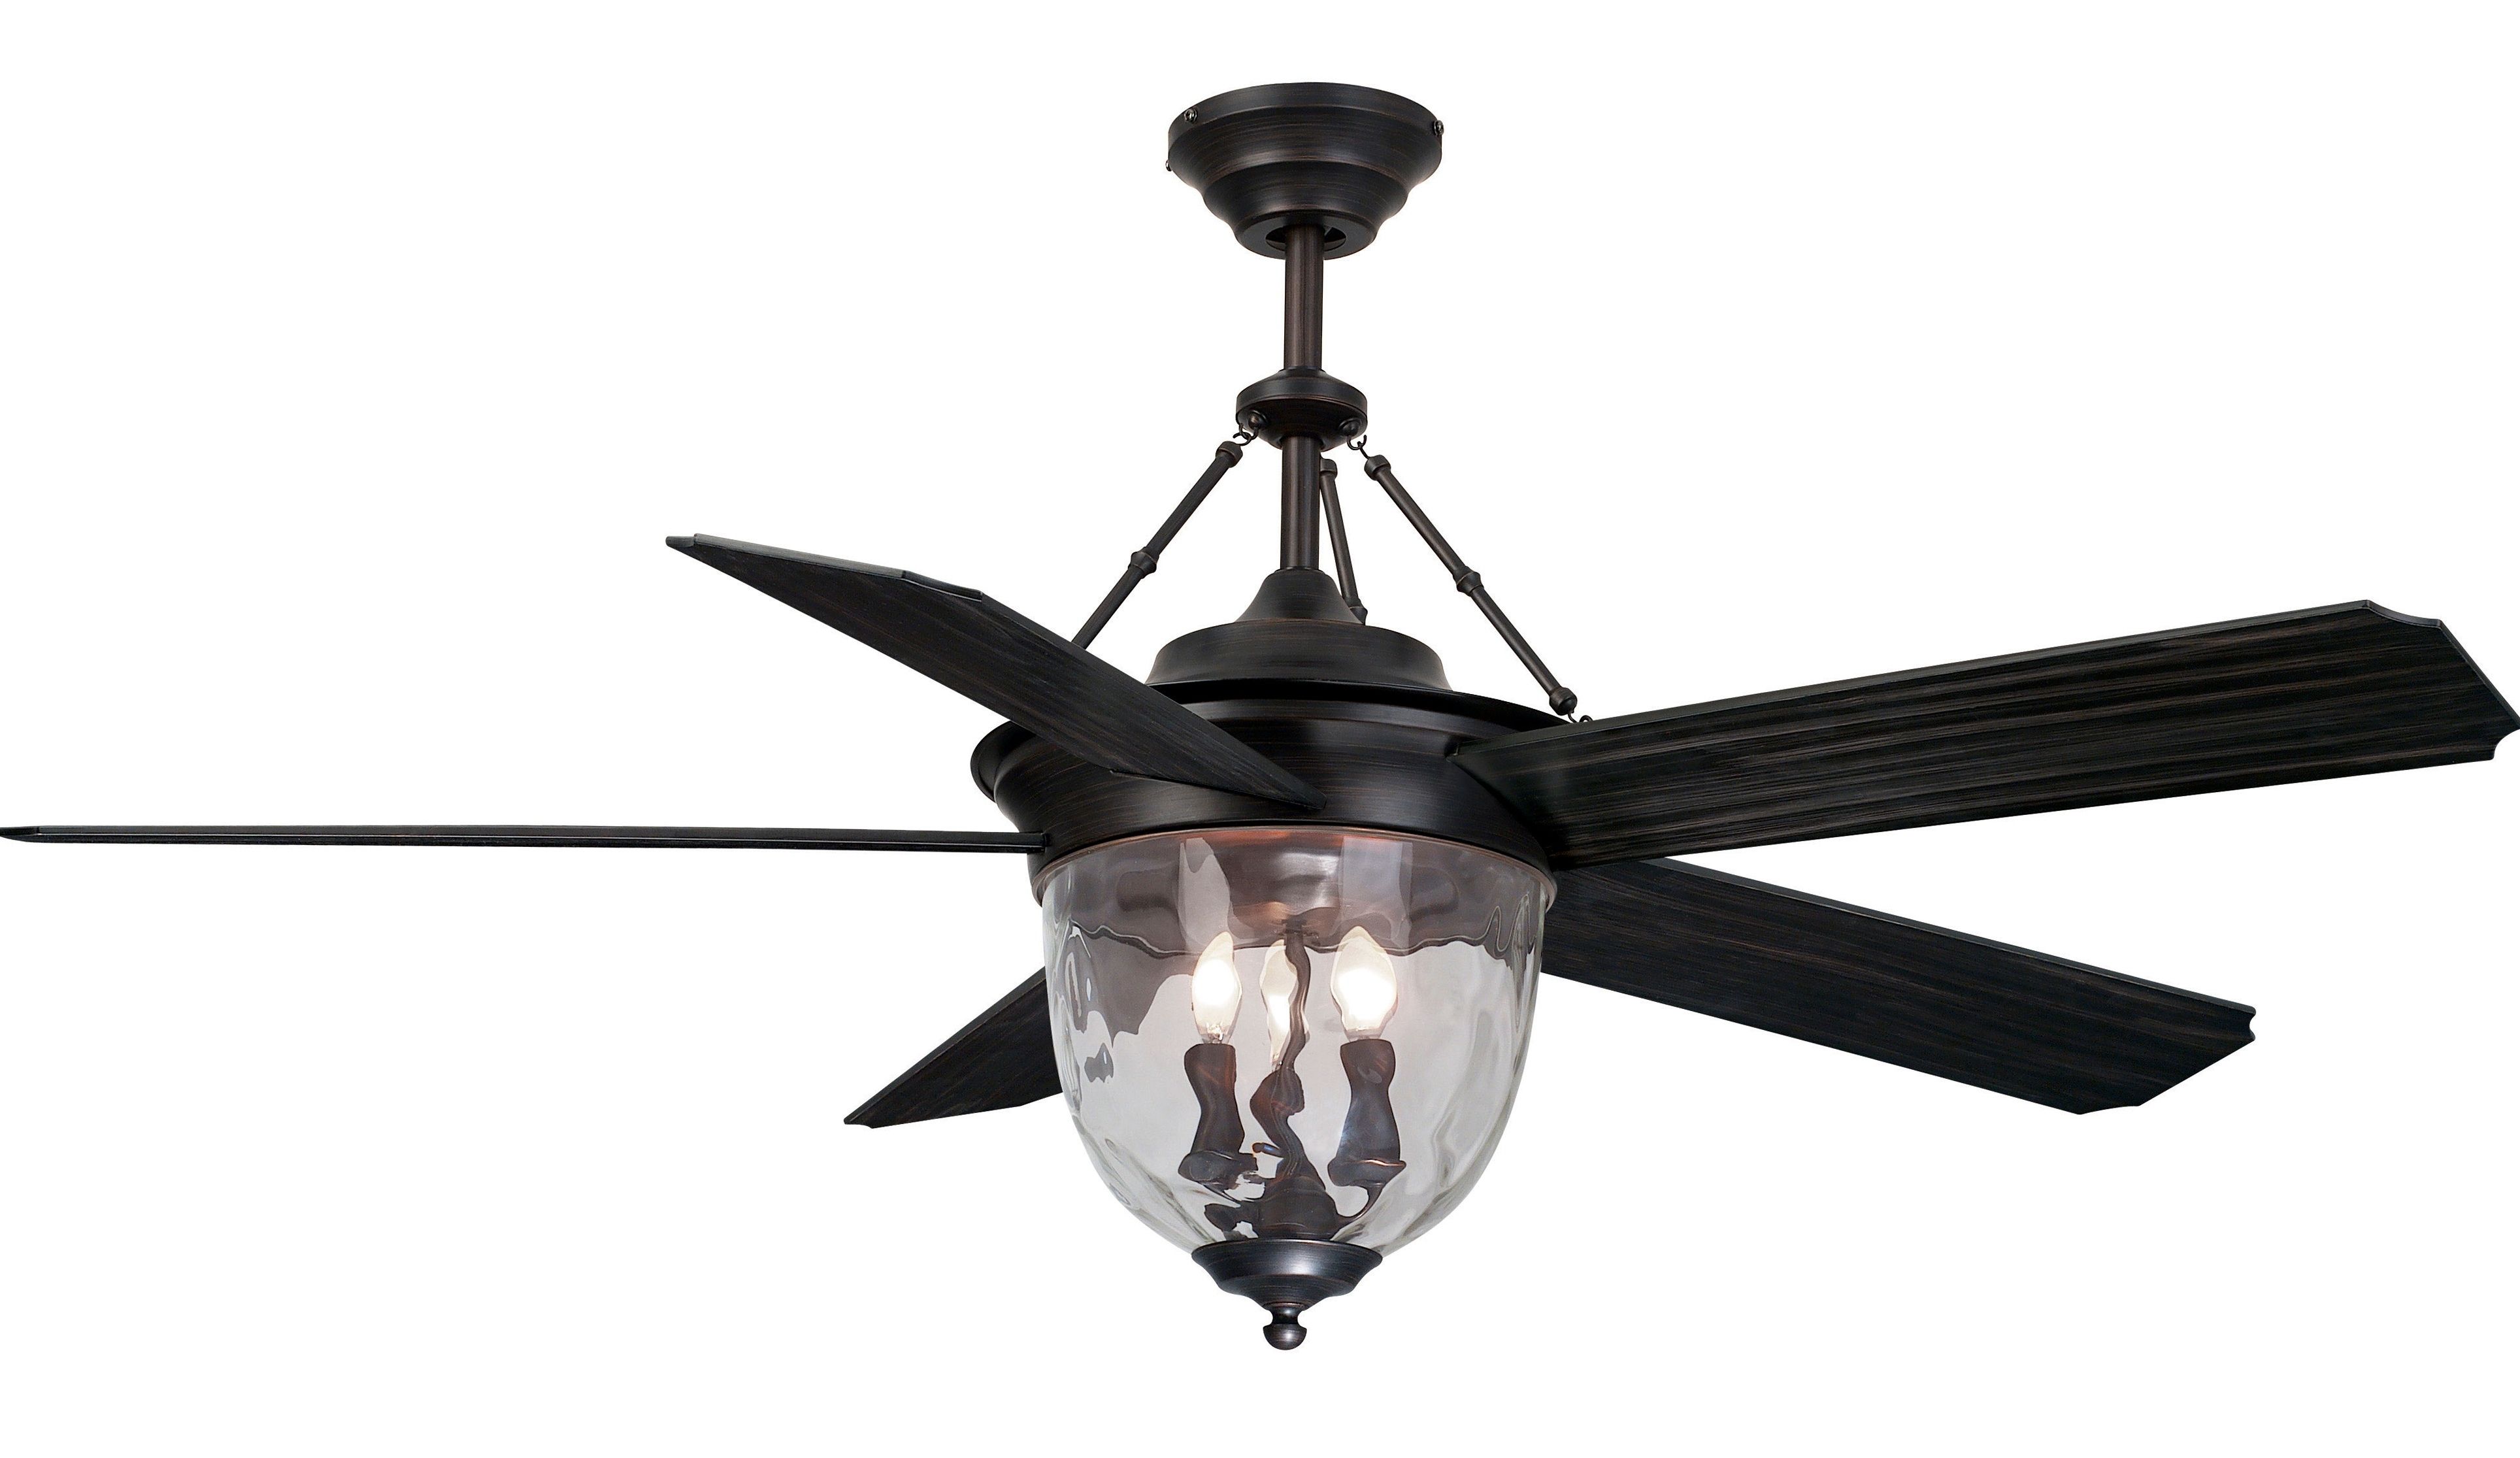 Outdoor Ceiling Fans At Lowes Intended For Popular Ceiling: Amusing Lowes Ceiling Fans With Lights Outdoor Ceiling Fan (View 6 of 20)